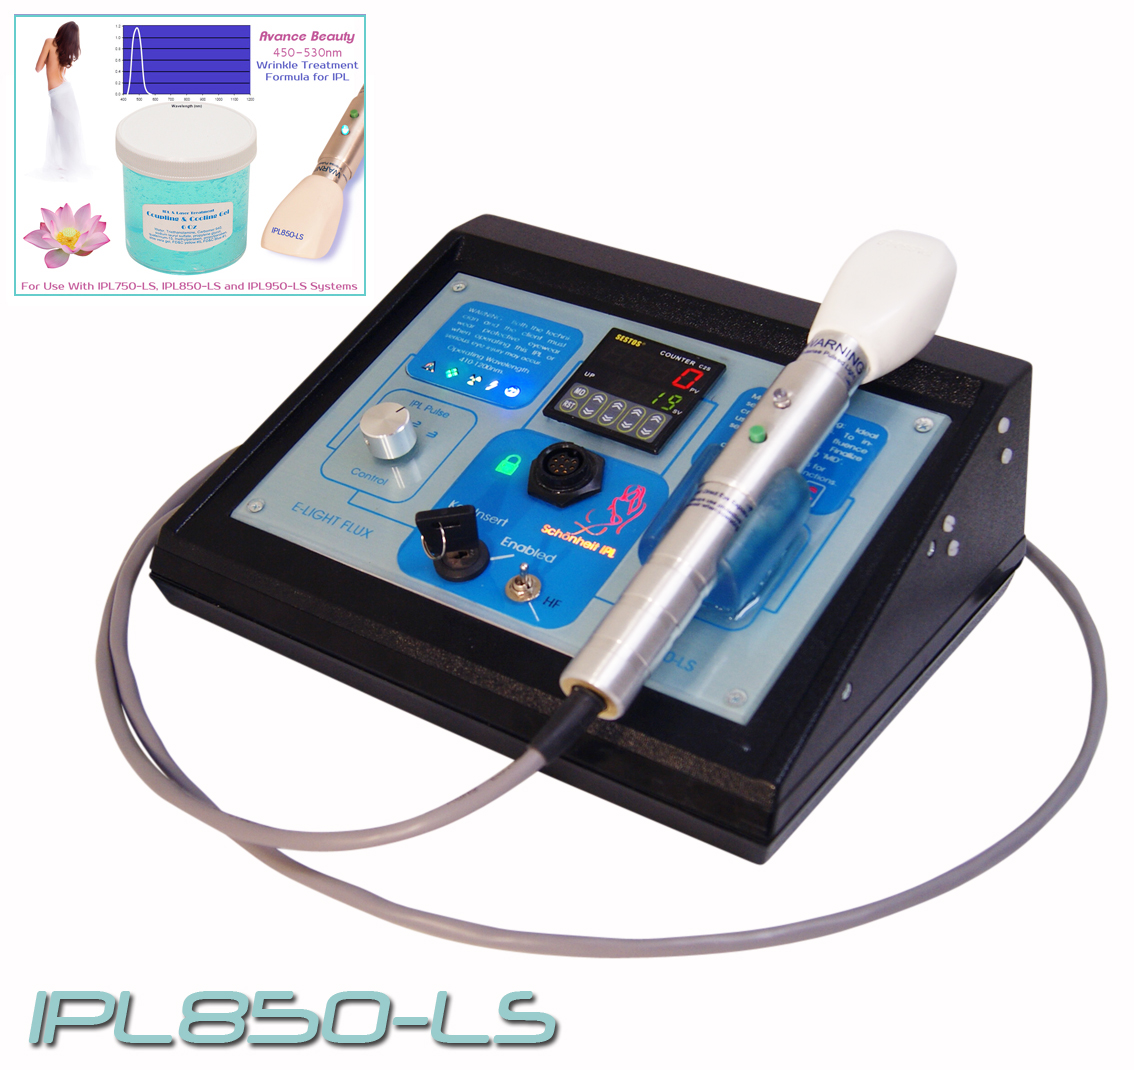 IPL850-LS Wrinkle Treatment Gel Kit 450-530nm with Beauty Treatment Machine, System, Device.  642057128612